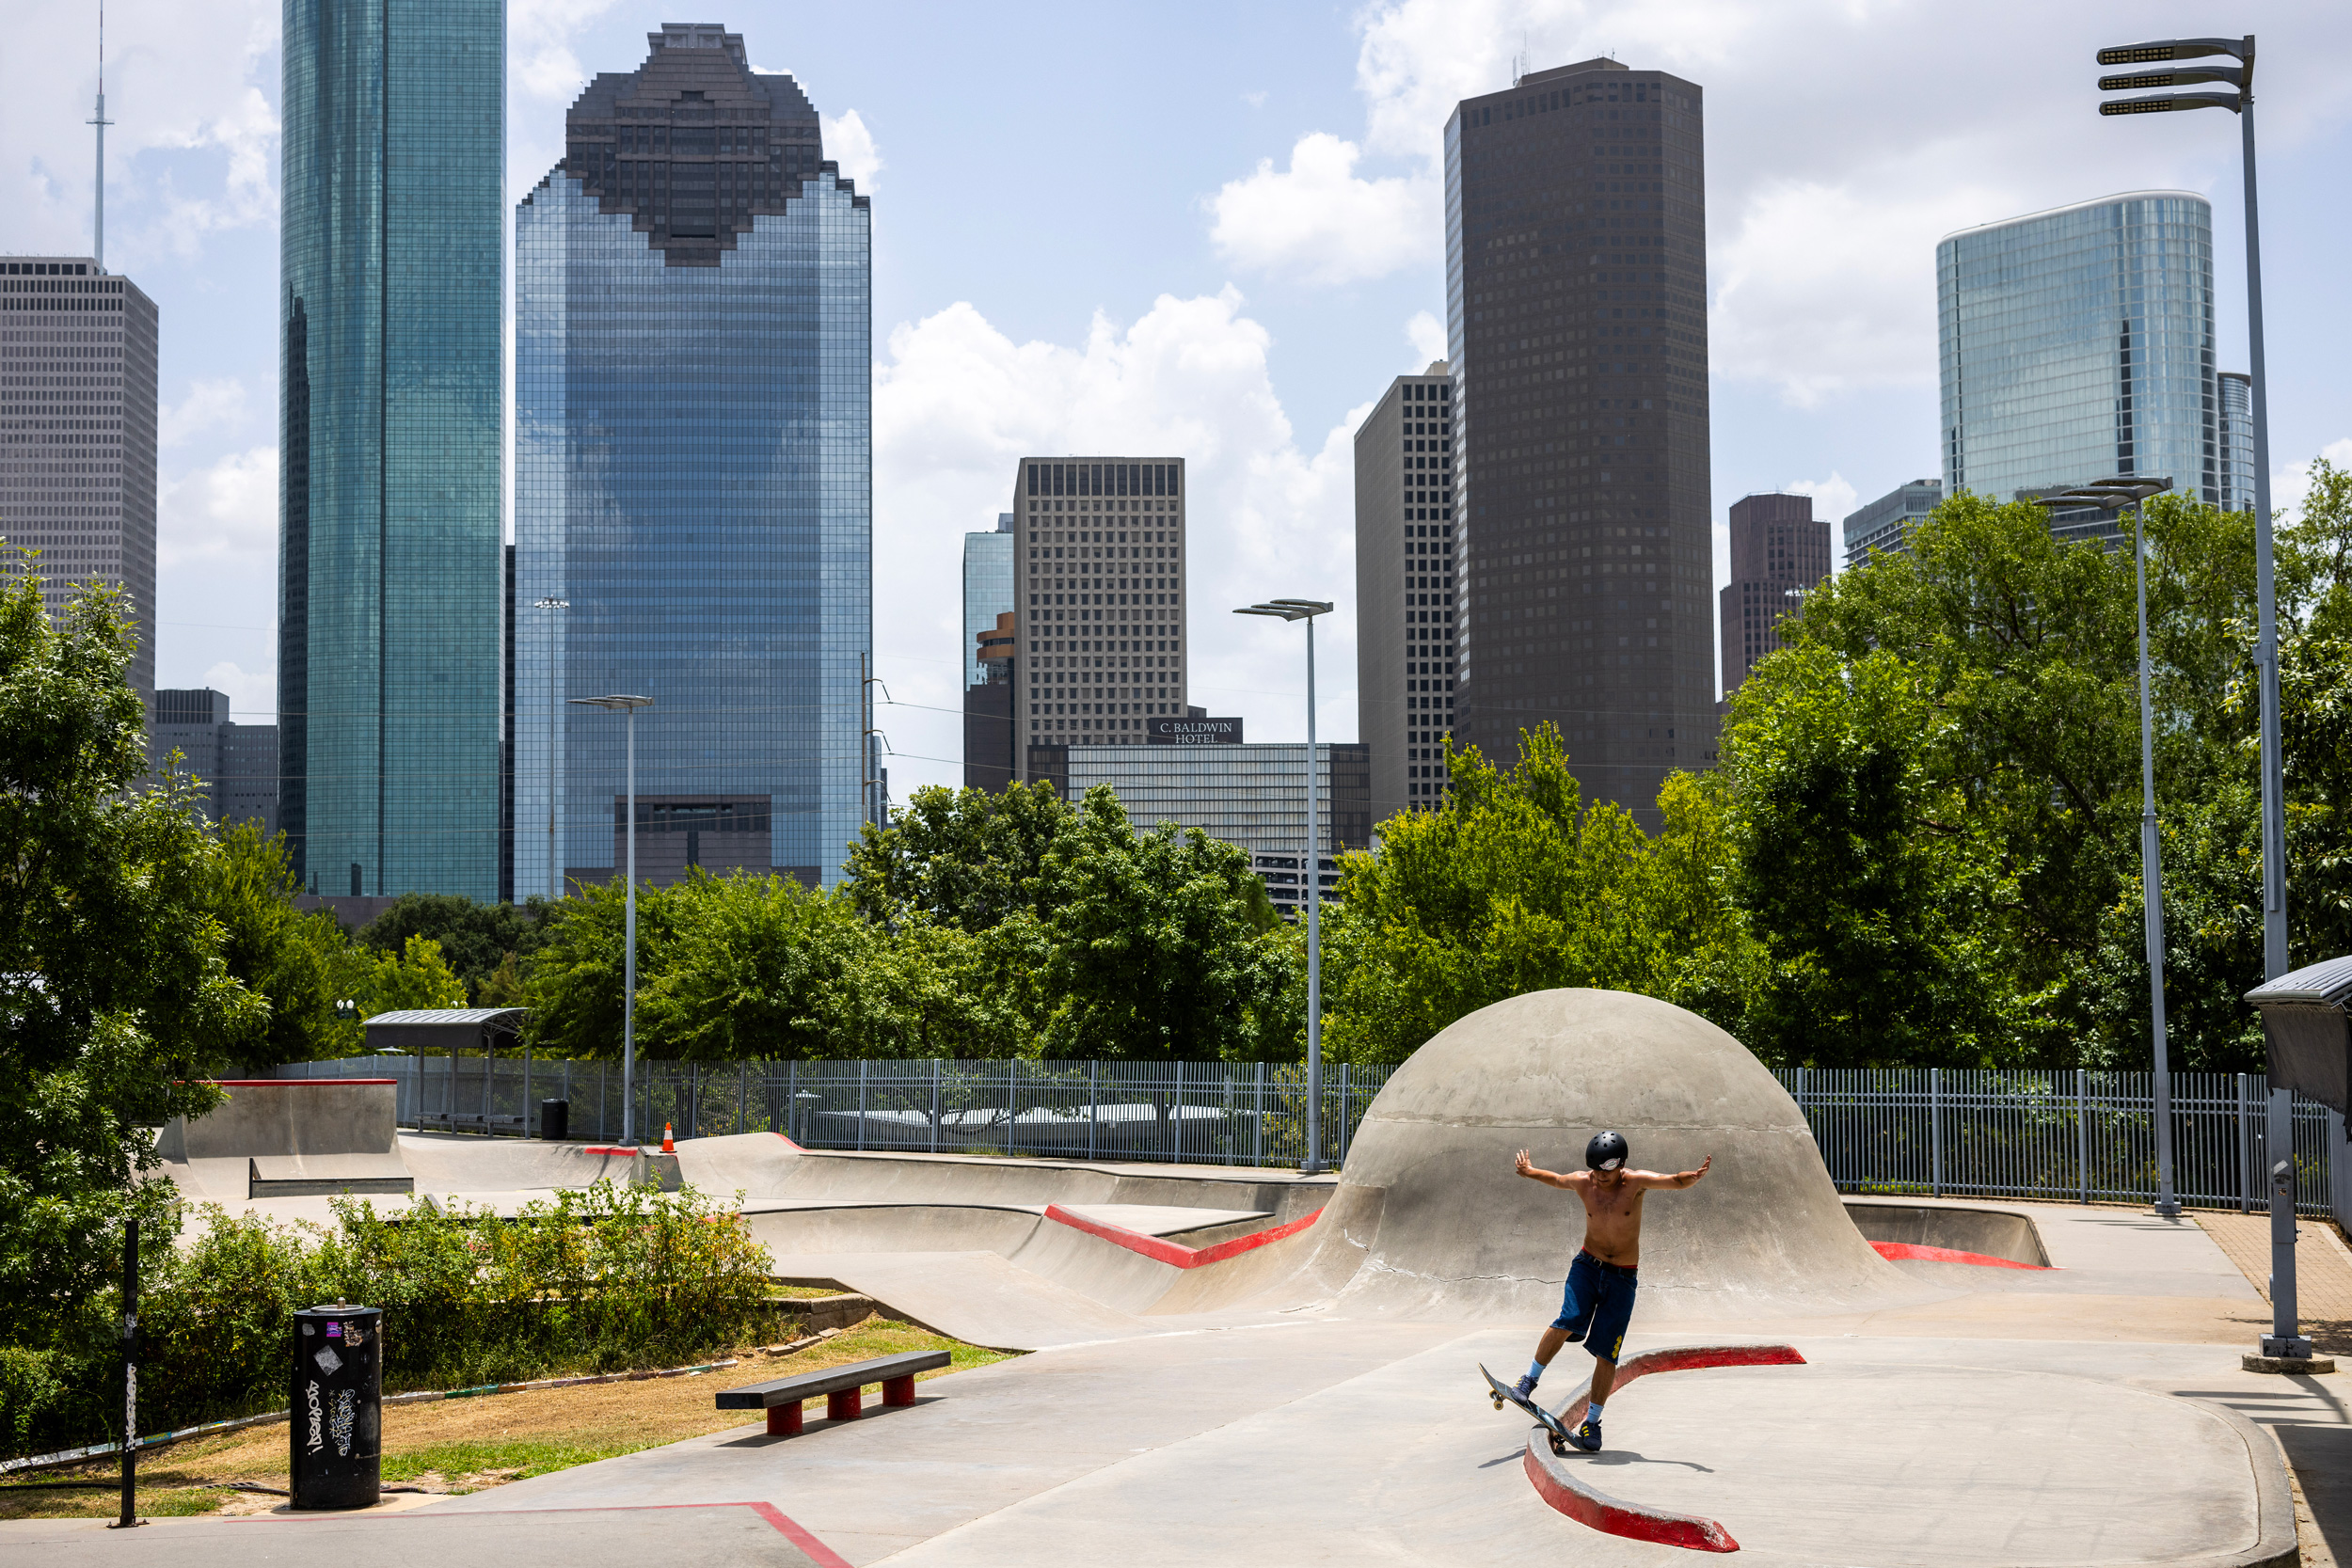 A skateboarder with downtown Houston in the background